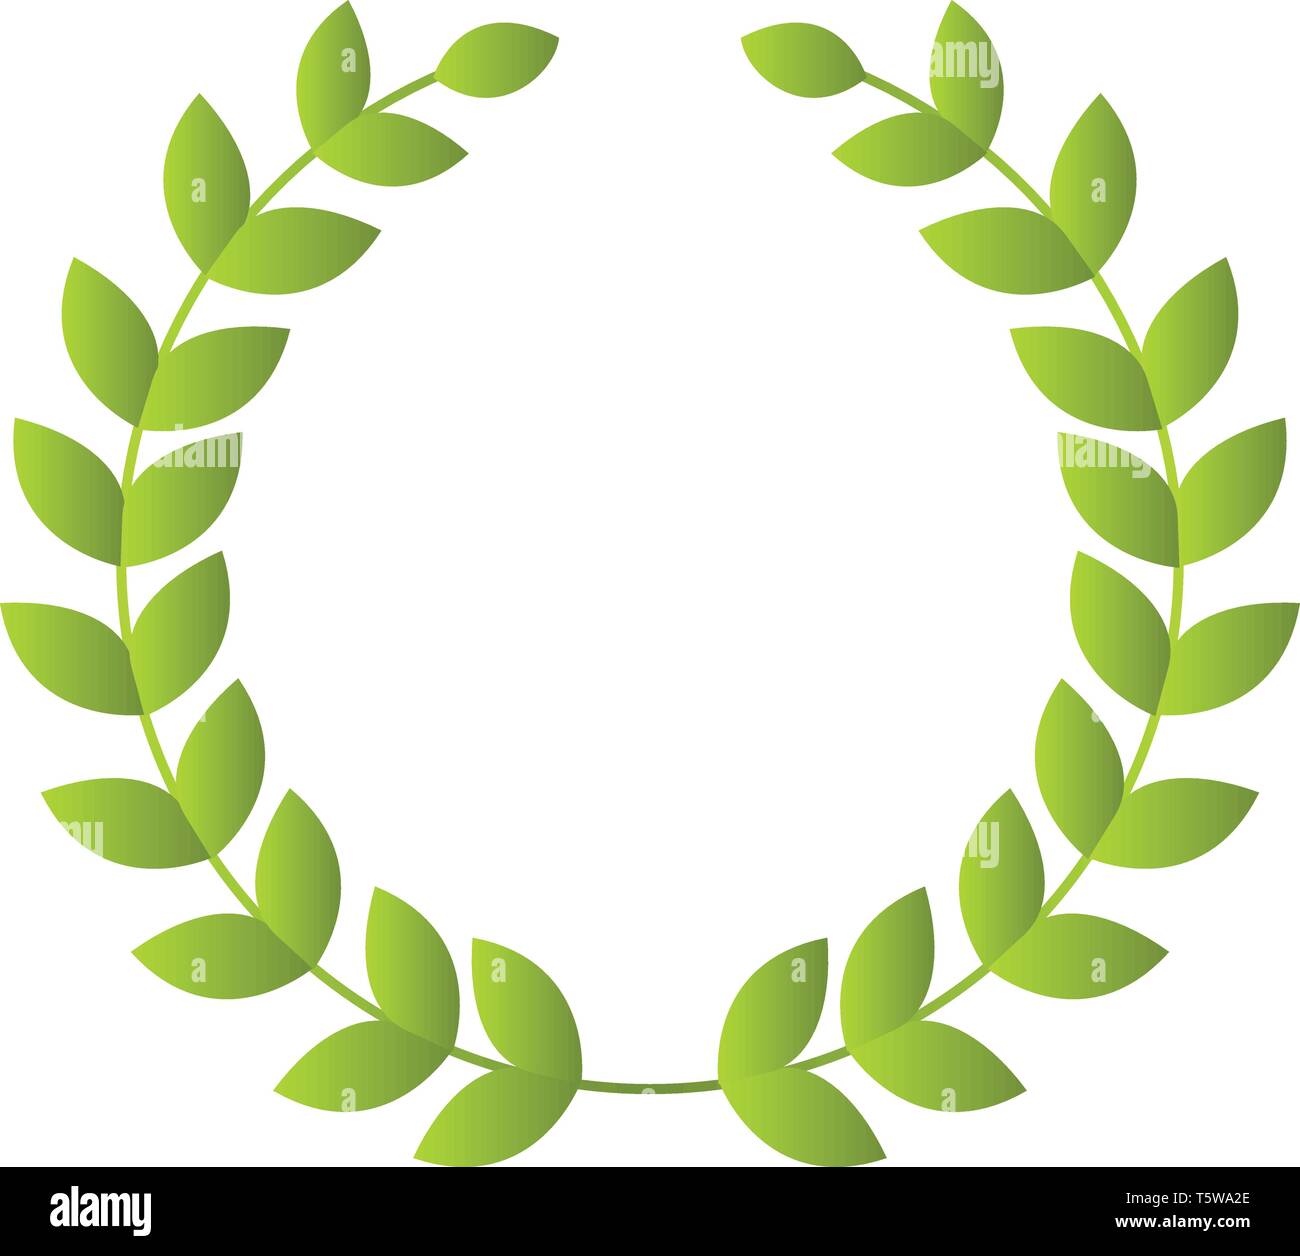 Light green leaves forming a wreath vector illustration on a white ...